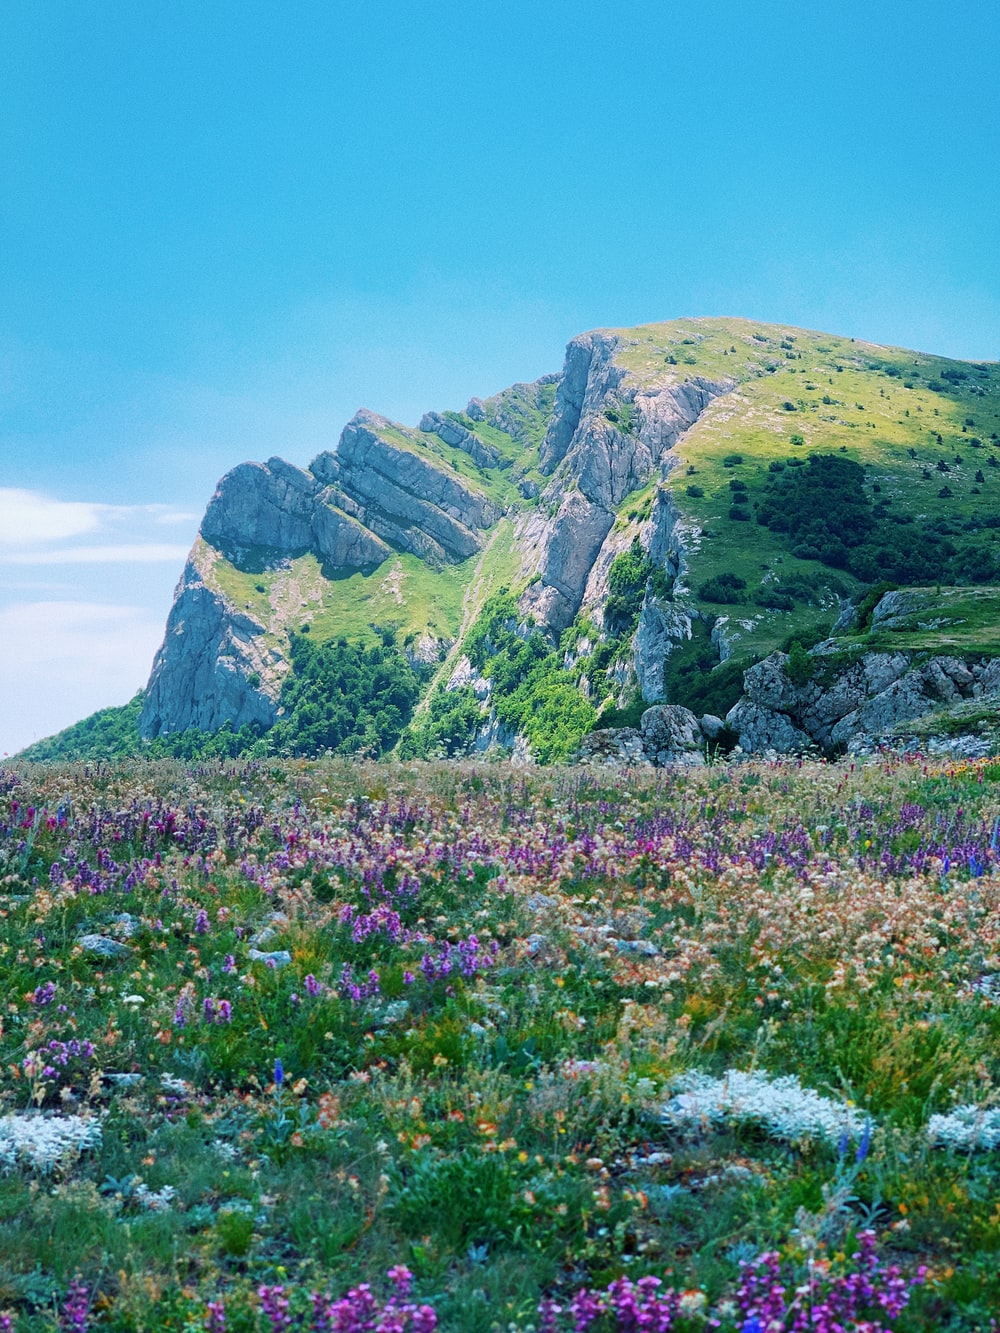 Mountain Flower Picture. Download Free Image